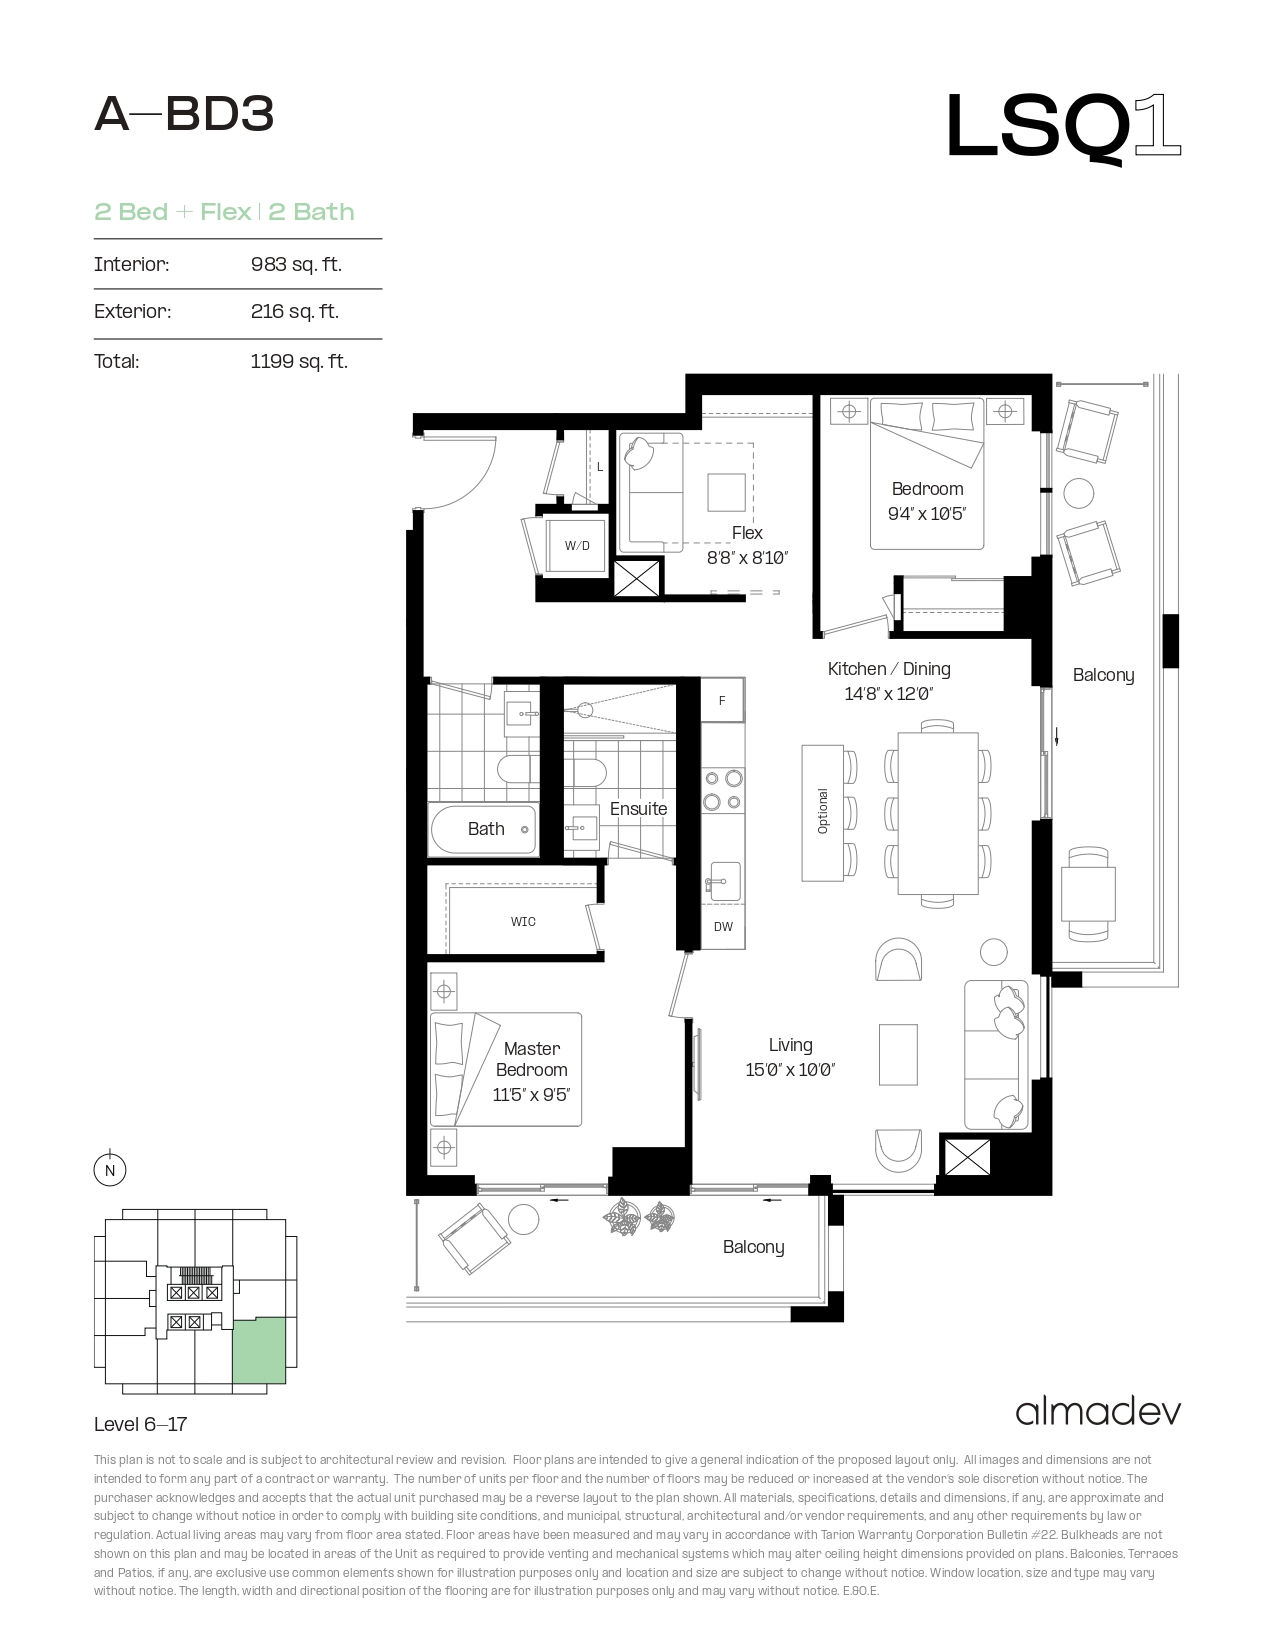 A-BD3 Floor Plan of LSQ Condos with undefined beds